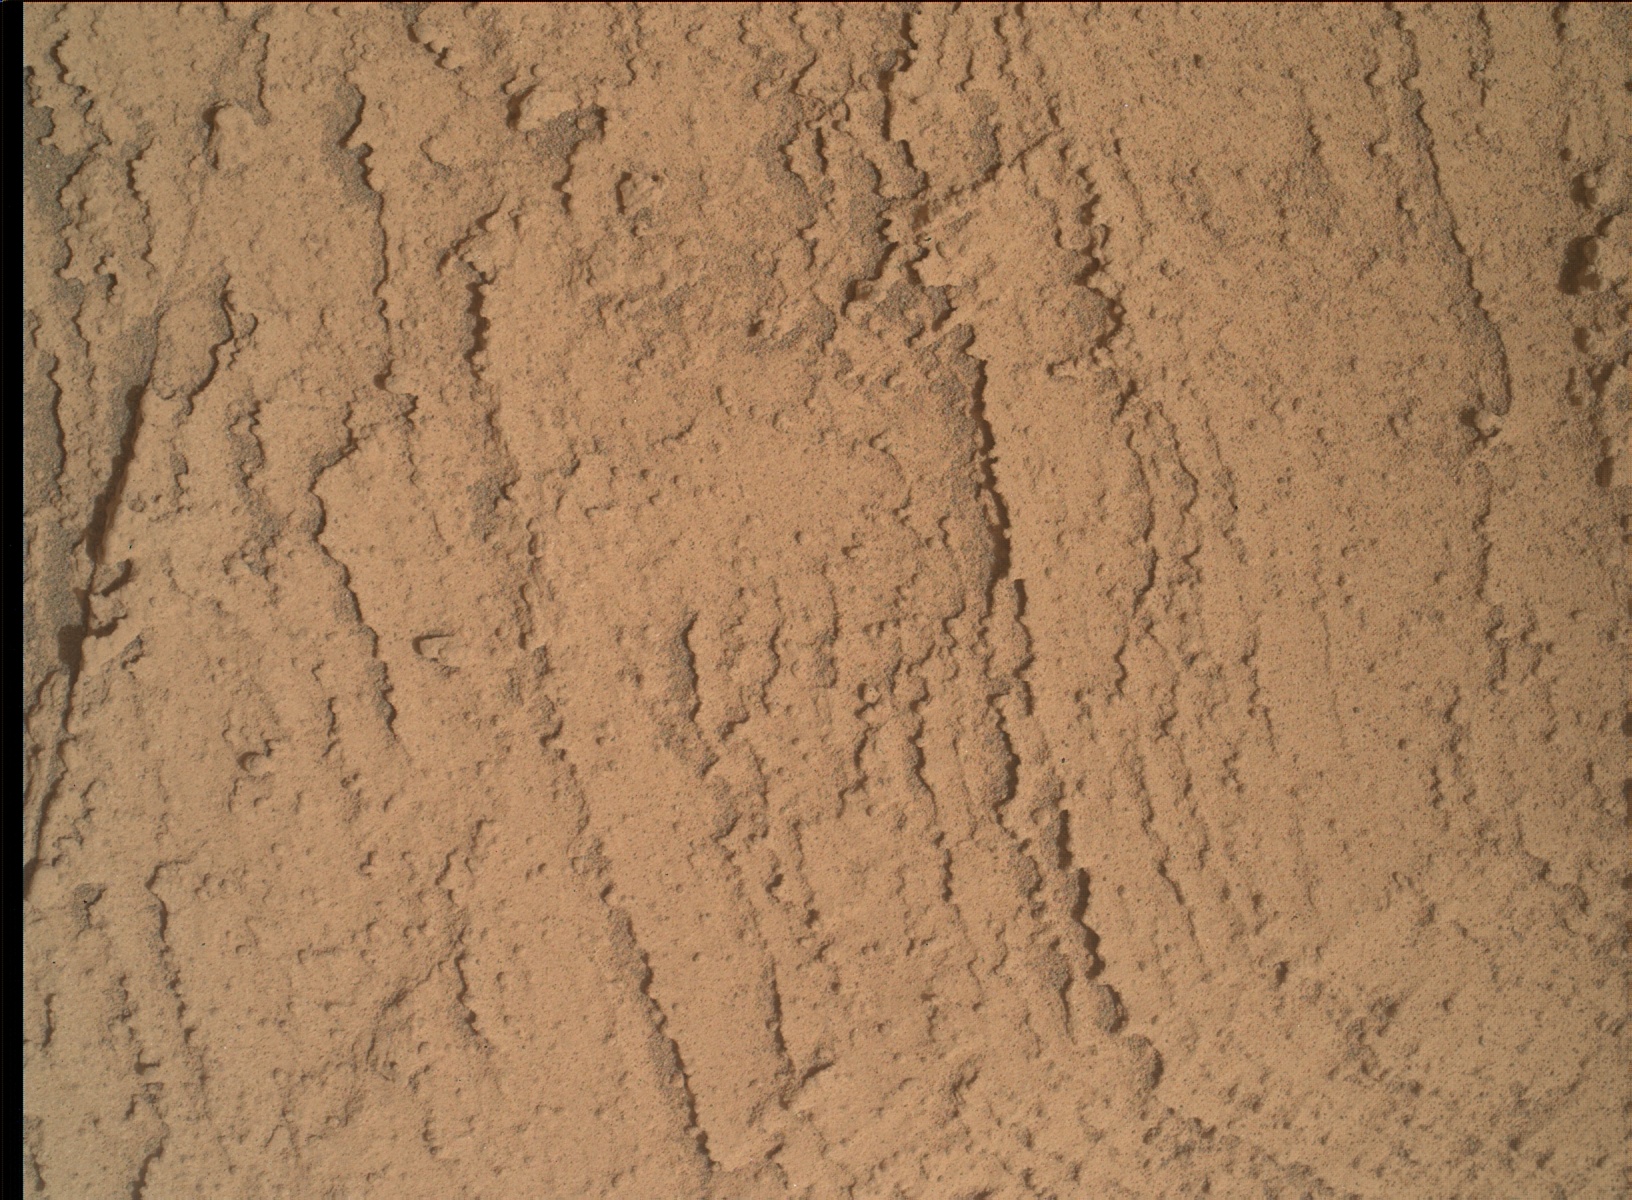 Nasa's Mars rover Curiosity acquired this image using its Mars Hand Lens Imager (MAHLI) on Sol 3476